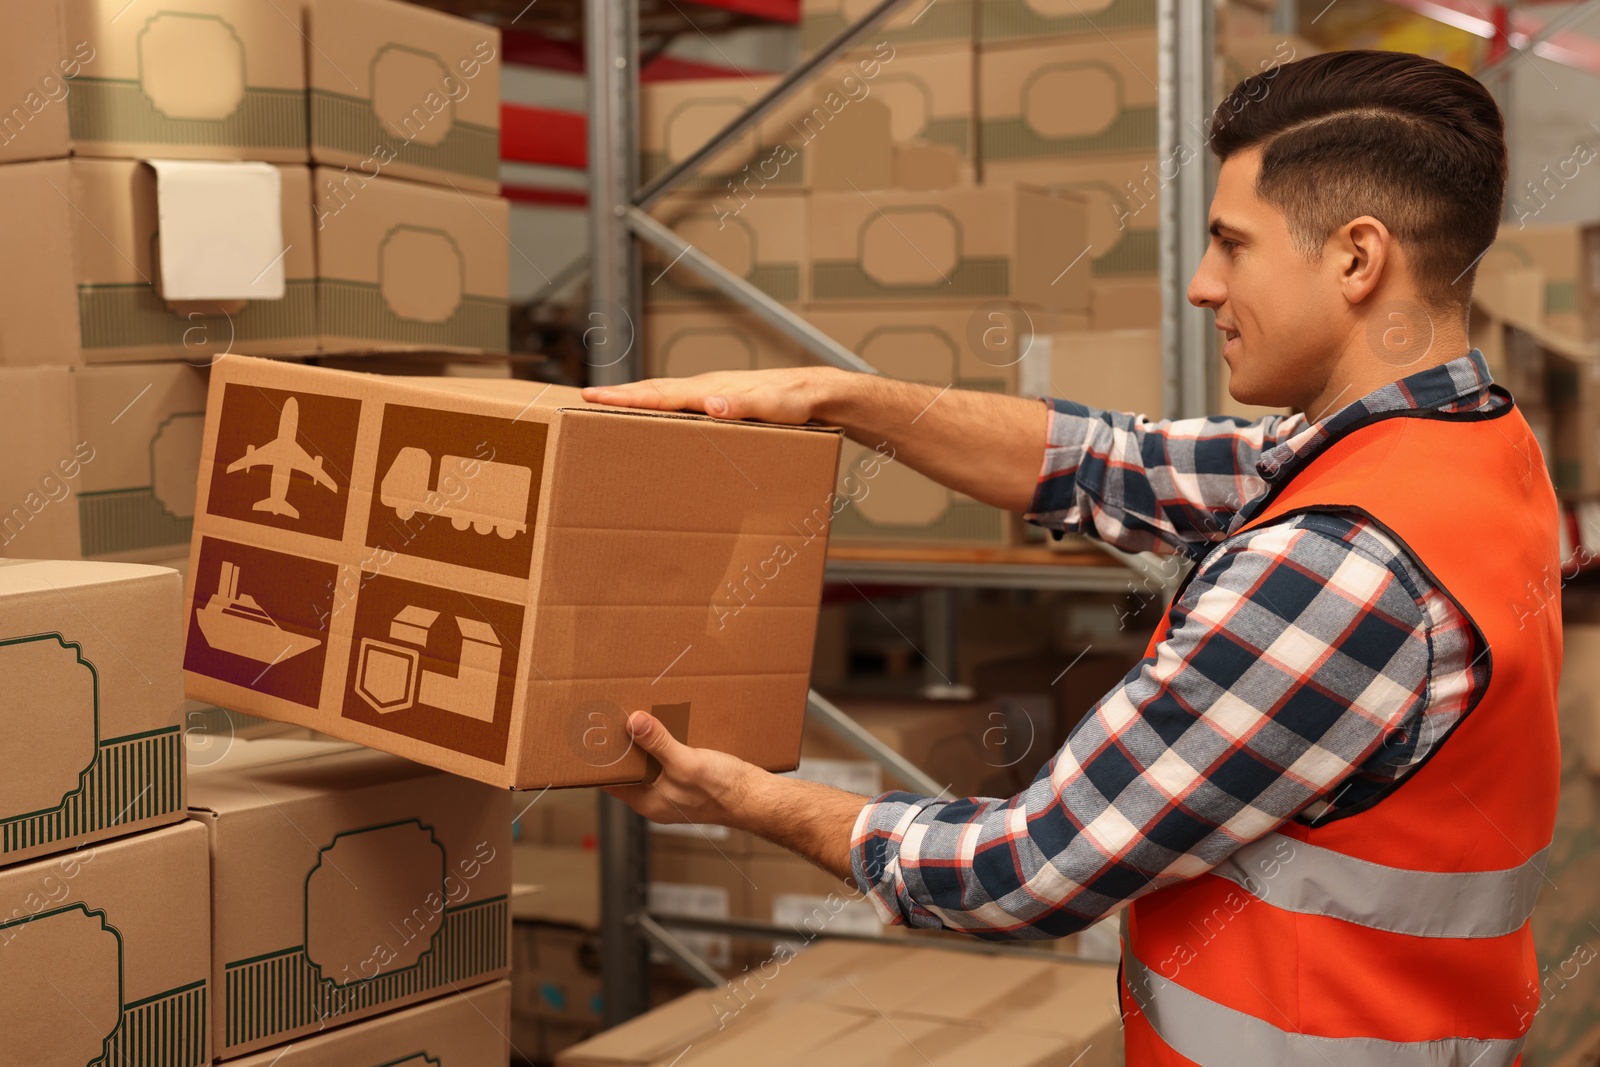 Image of Worker stacking cardboard boxes with shipping icons in warehouse. Wholesaling